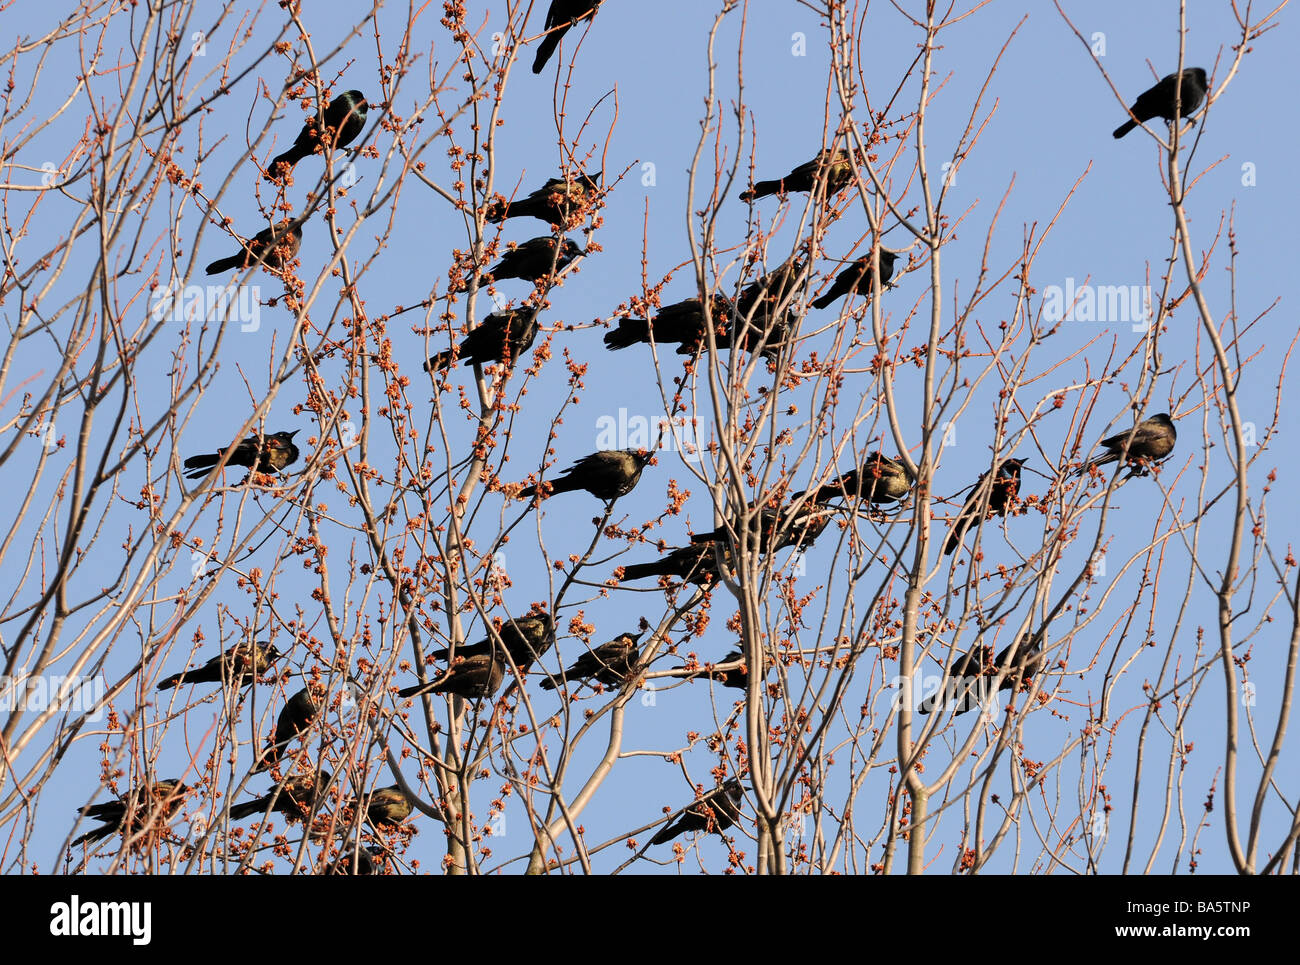 Blackbirds sitting, pointing in same direction, flying through the branches of a tree on a beautiful spring, summer, autumn day Stock Photo